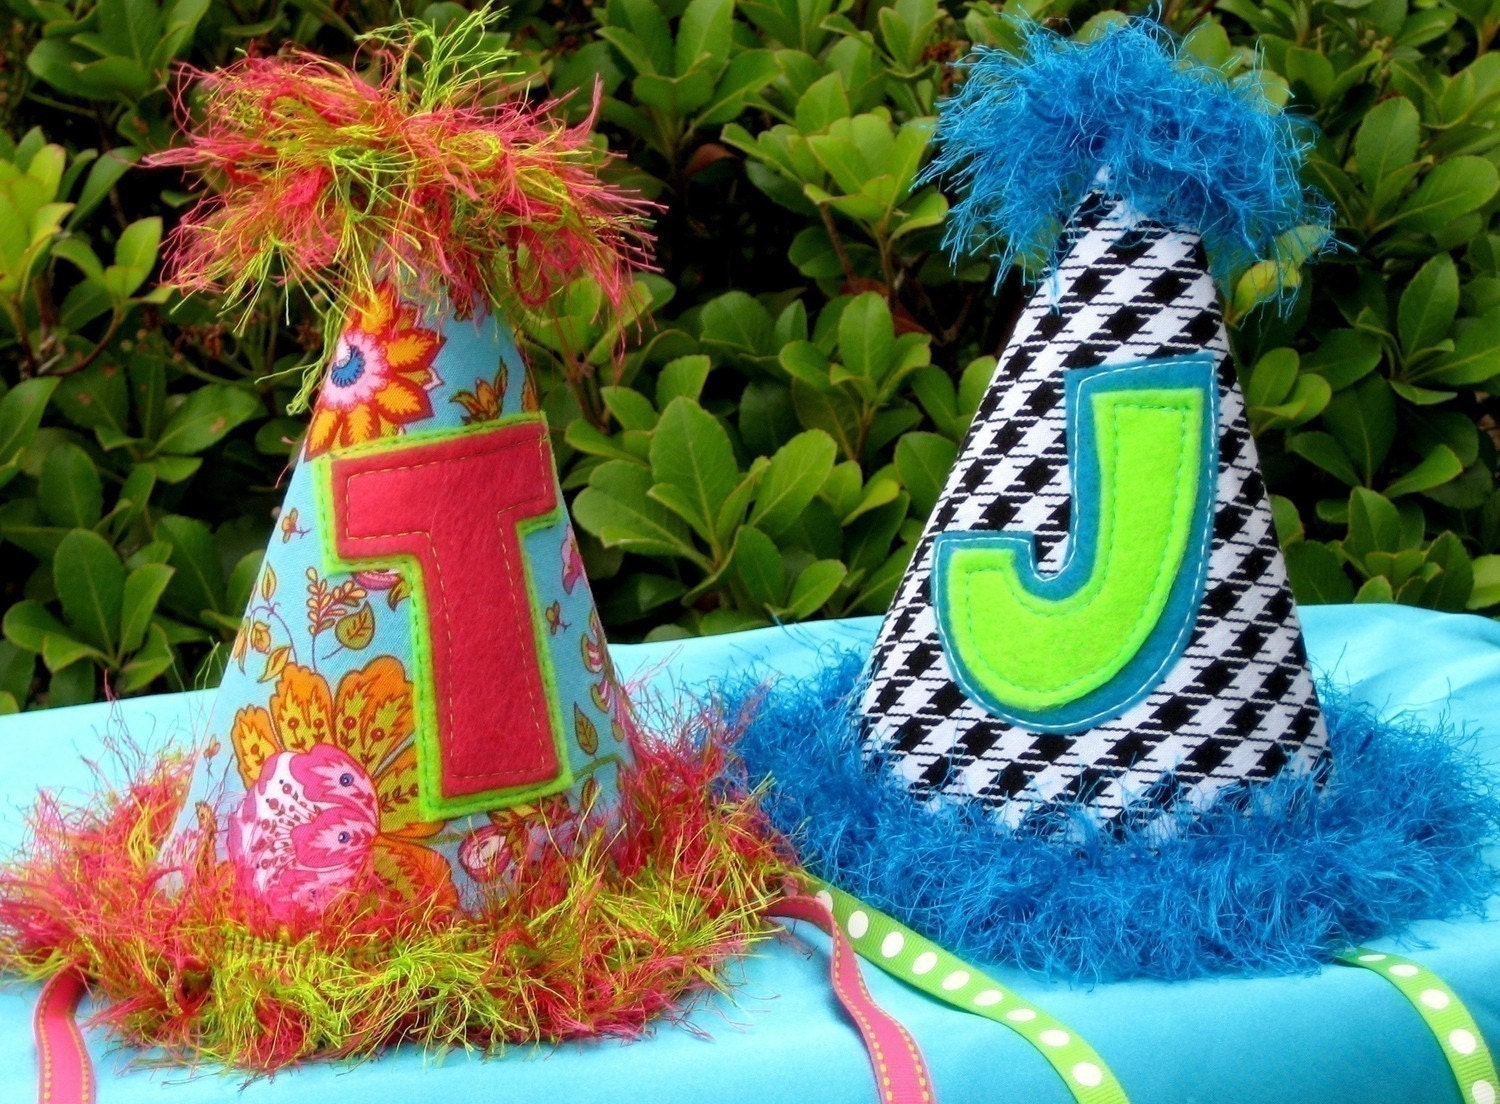 Birthday Party Hat Pattern - No Sew Option. From littlelizardking